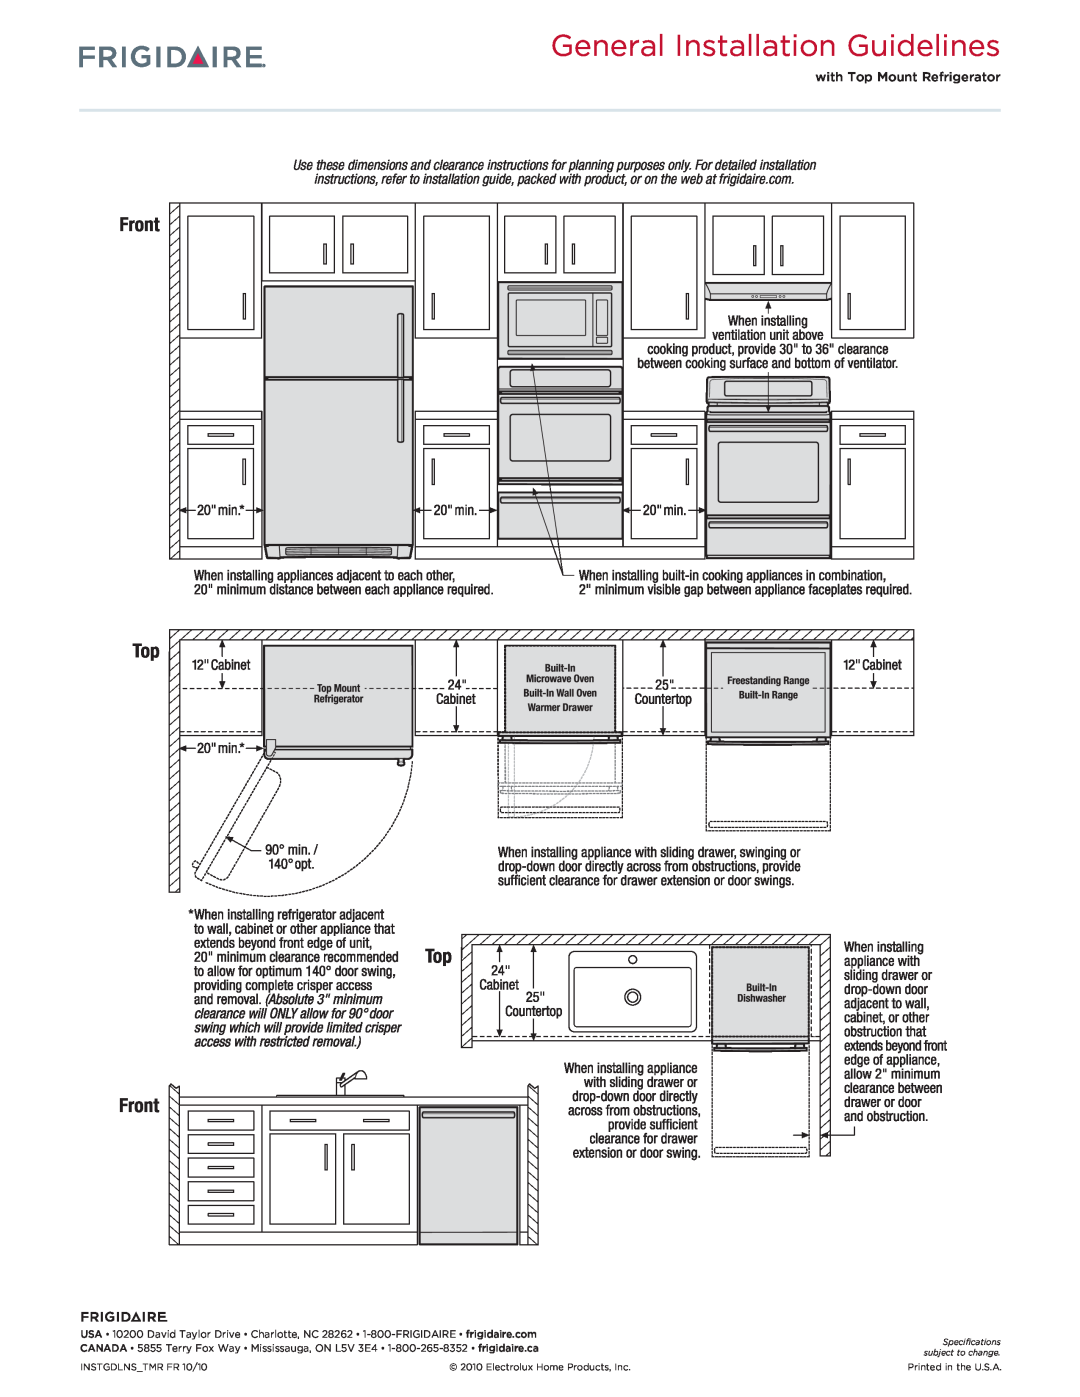 Frigidaire FPES3085K F dimensions General Installation Guidelines, Top Front, with Top Mount Refrigerator 